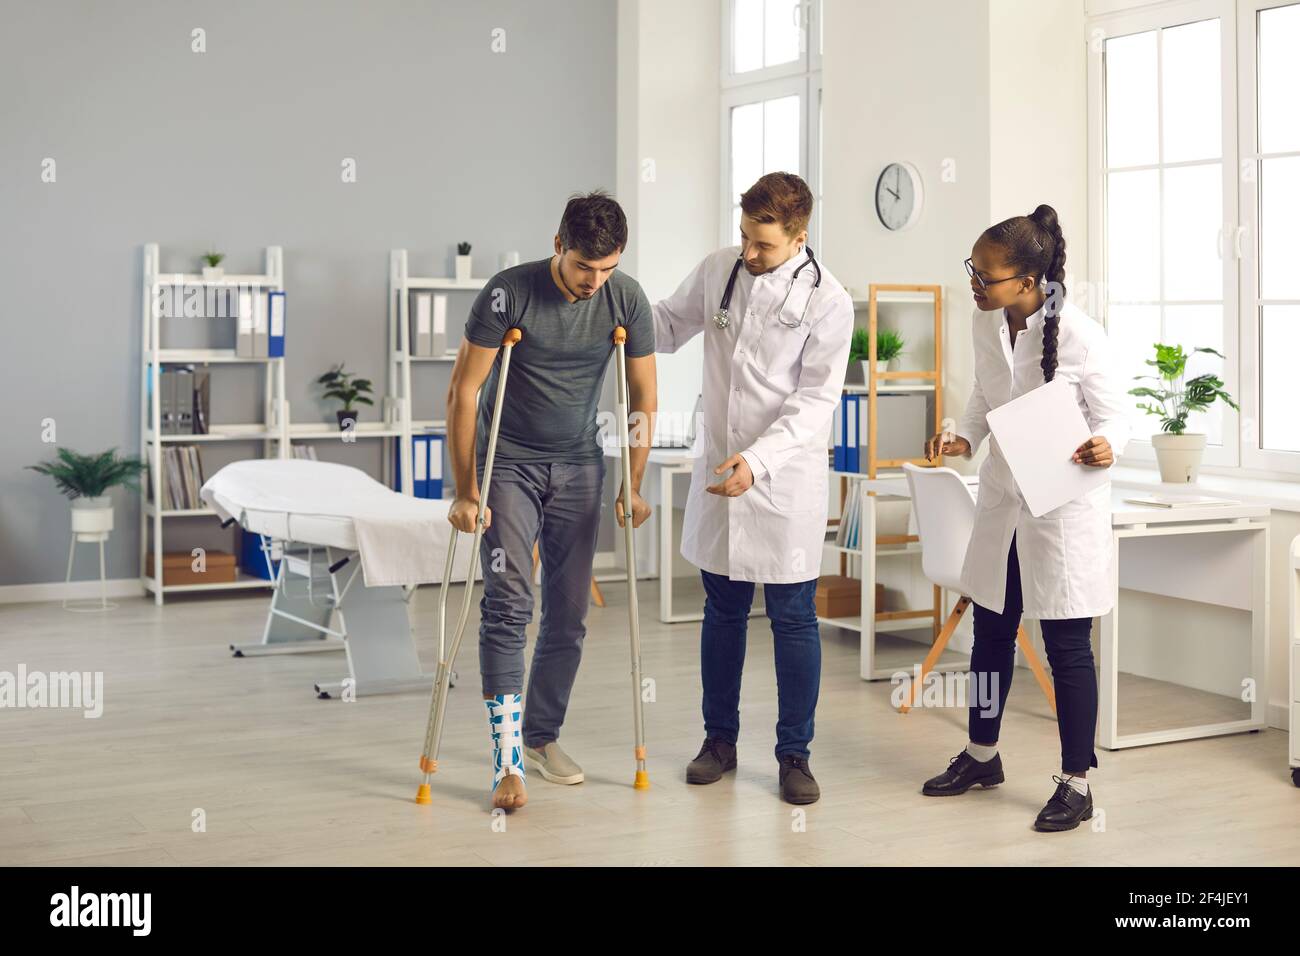 Team of doctors of different nationalities in the hospital helps their patient with a broken ankle. Stock Photo